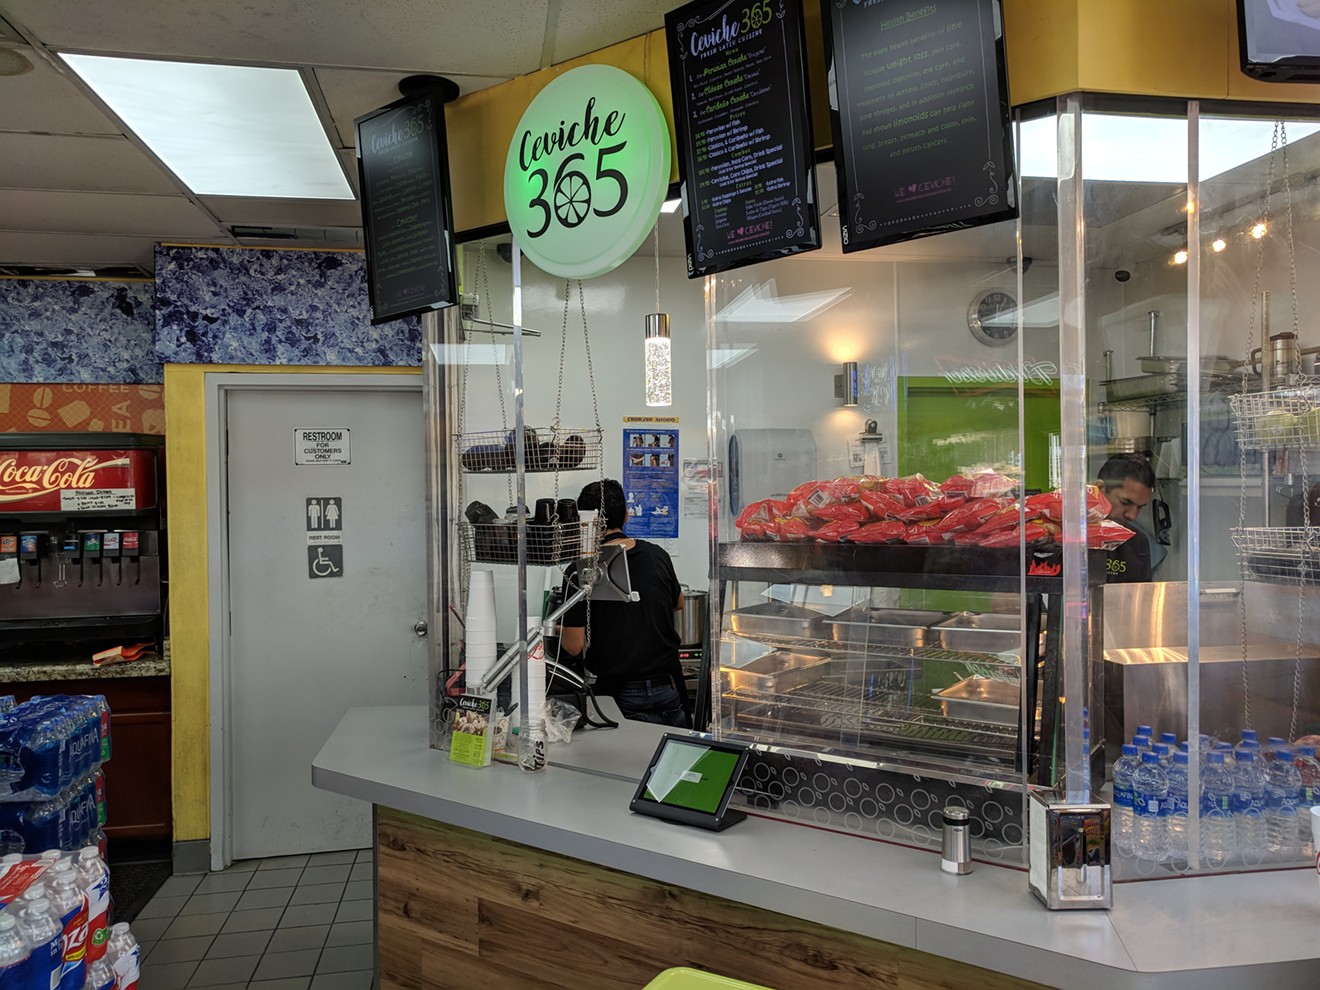 Ceviche 365 sits in the right-hand corner of the Shell convenience store at I-35 and Royal Lane.